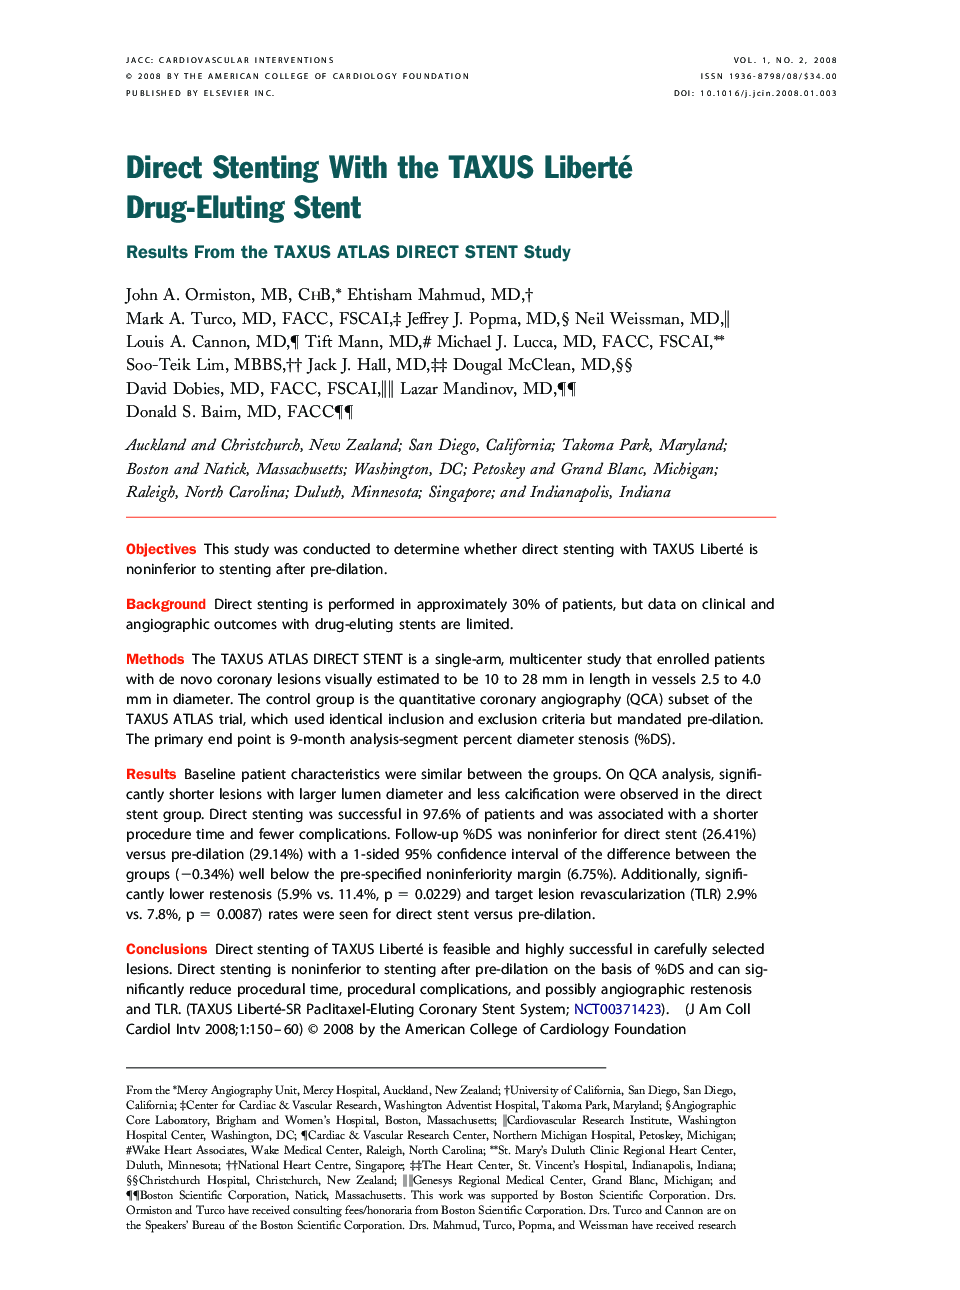 Direct Stenting With the TAXUS Liberté Drug-Eluting Stent : Results From the TAXUS ATLAS DIRECT STENT Study